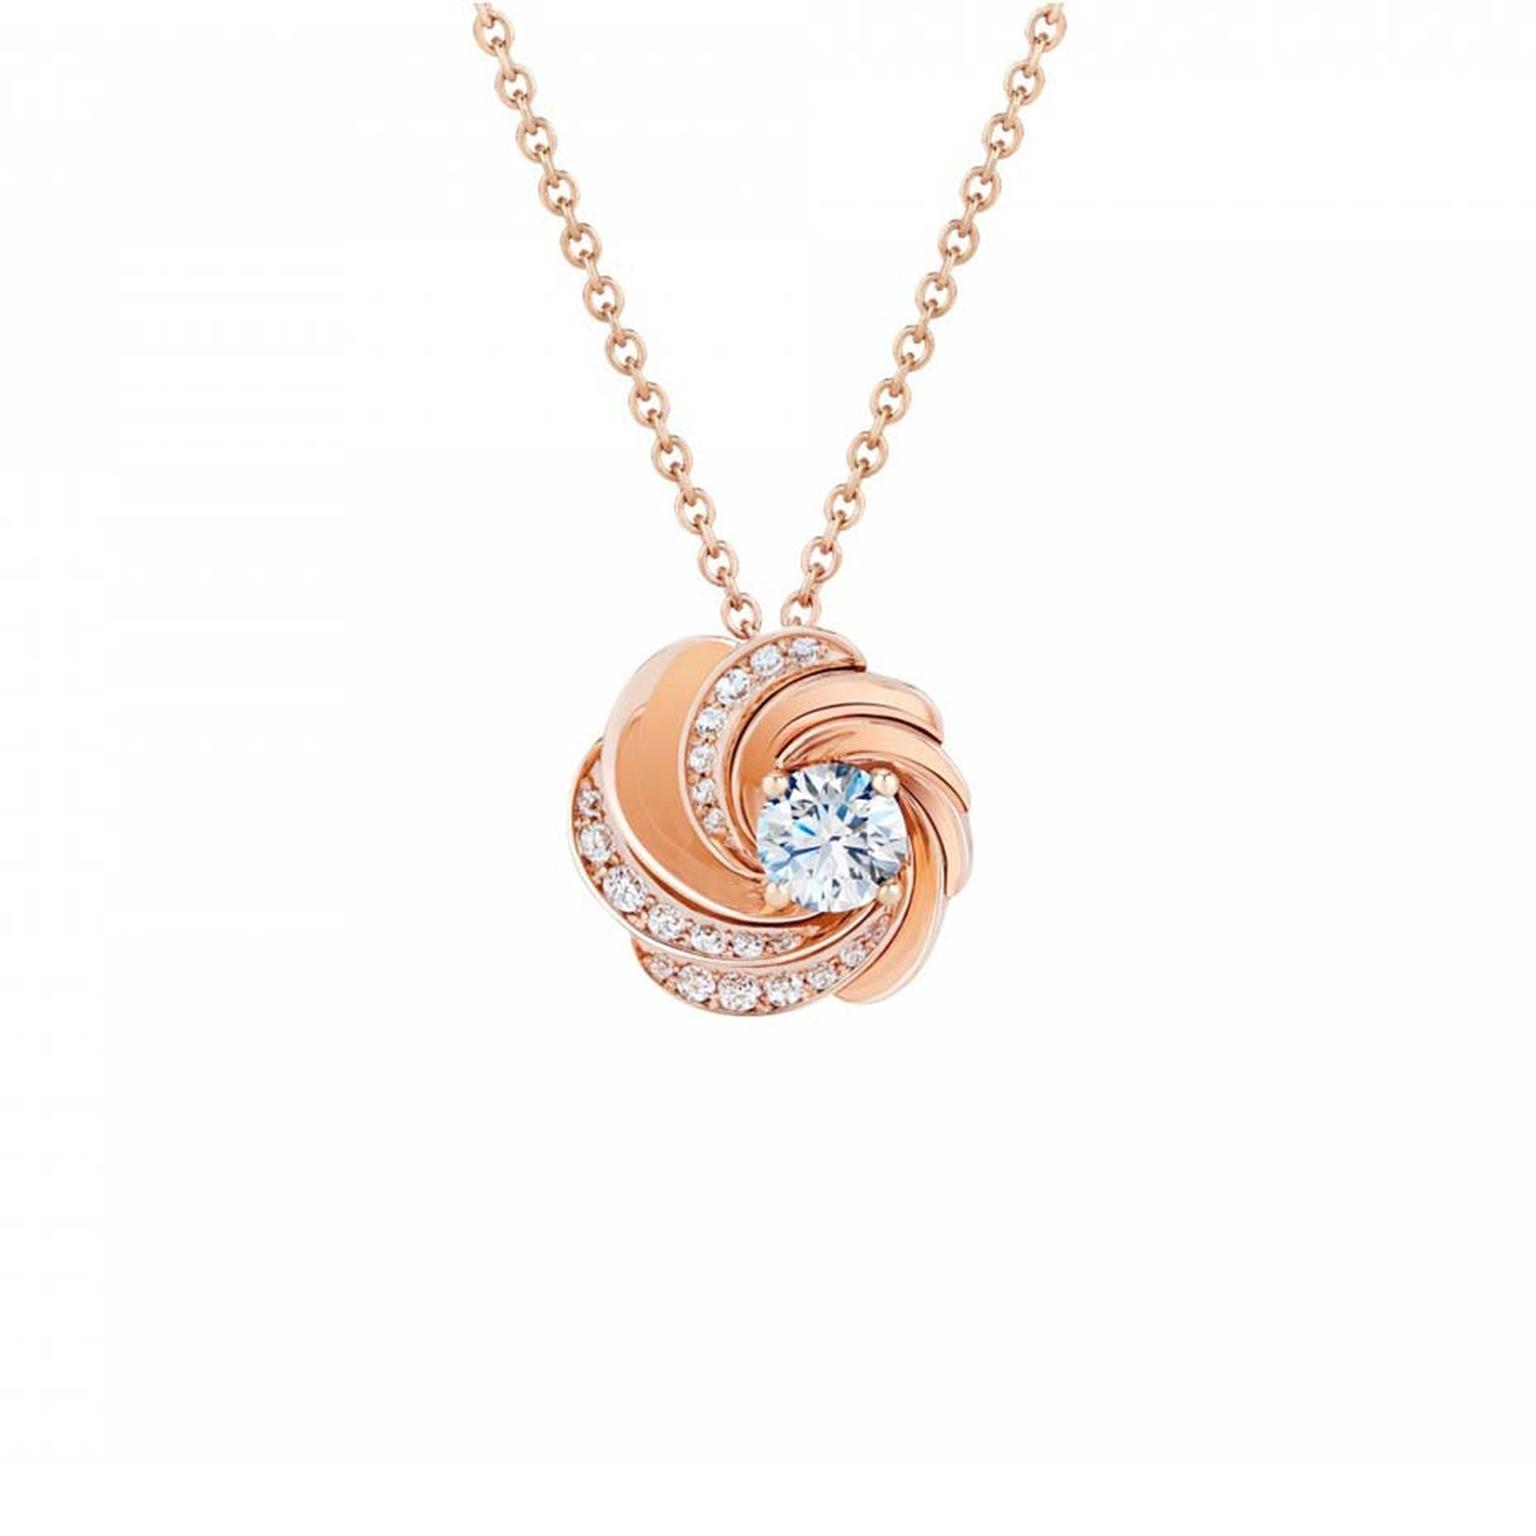 De Beers Aria rose gold necklace with diamonds.